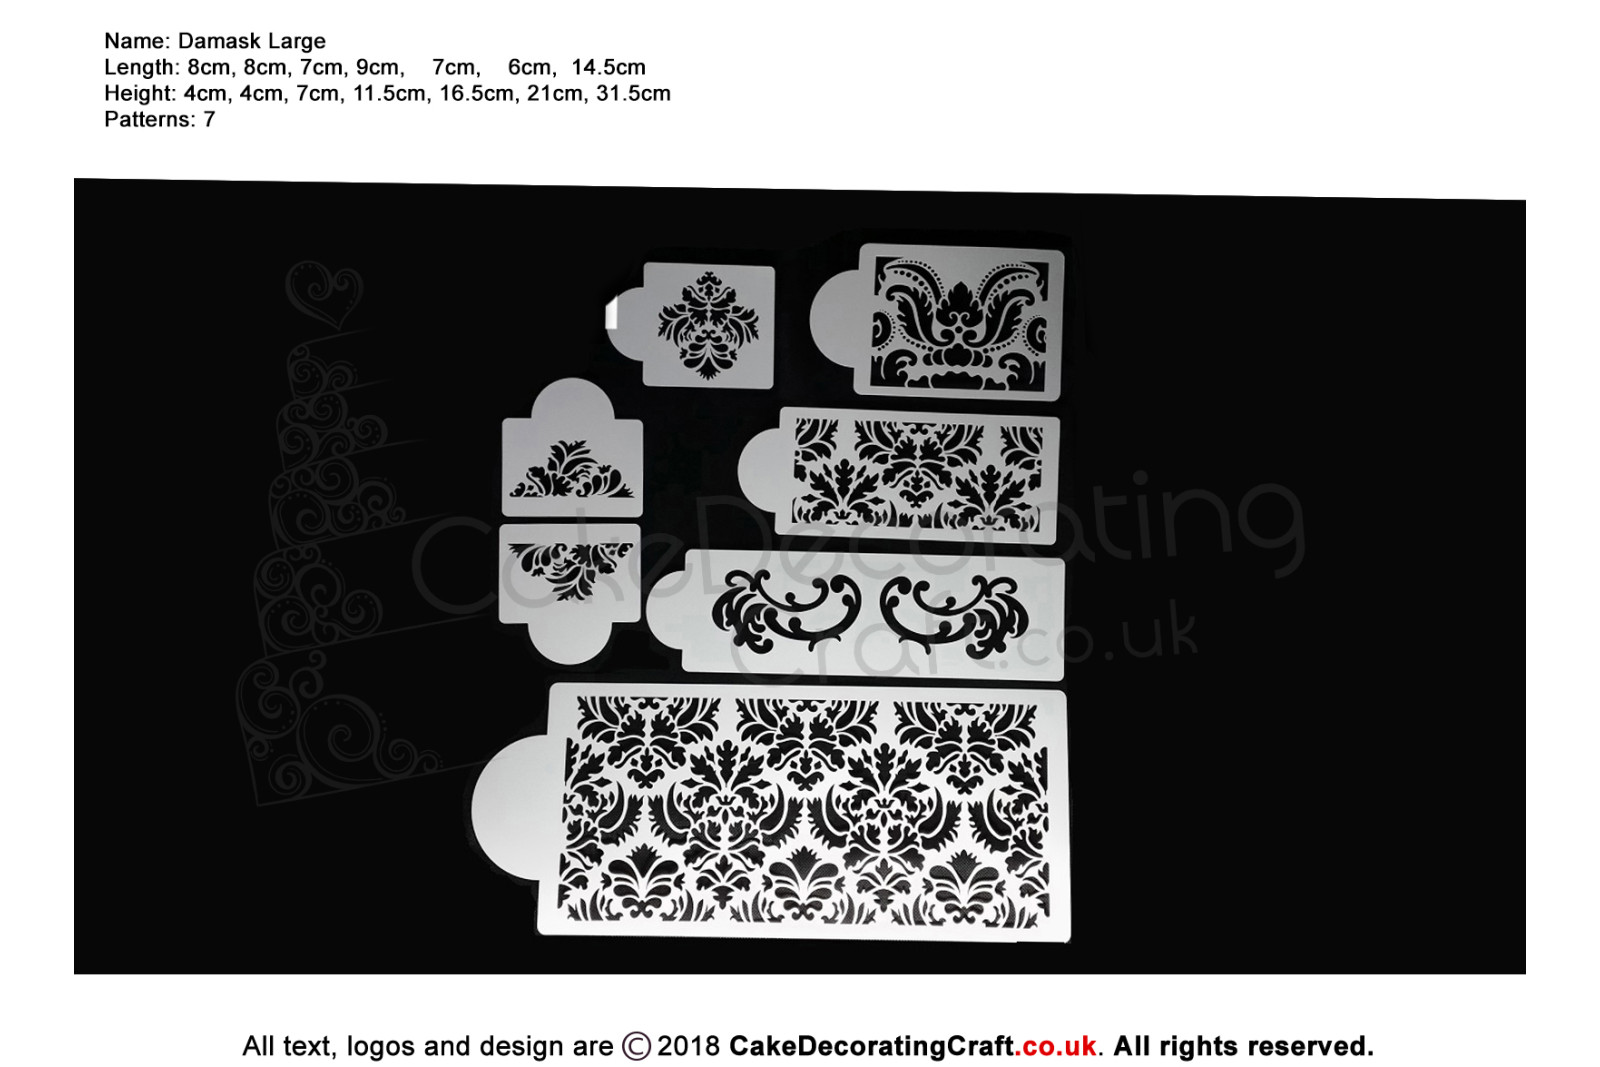 Damask Large Stencil | Air Brush Stenciling | Cake and Cupcake Decorating Craft Tool